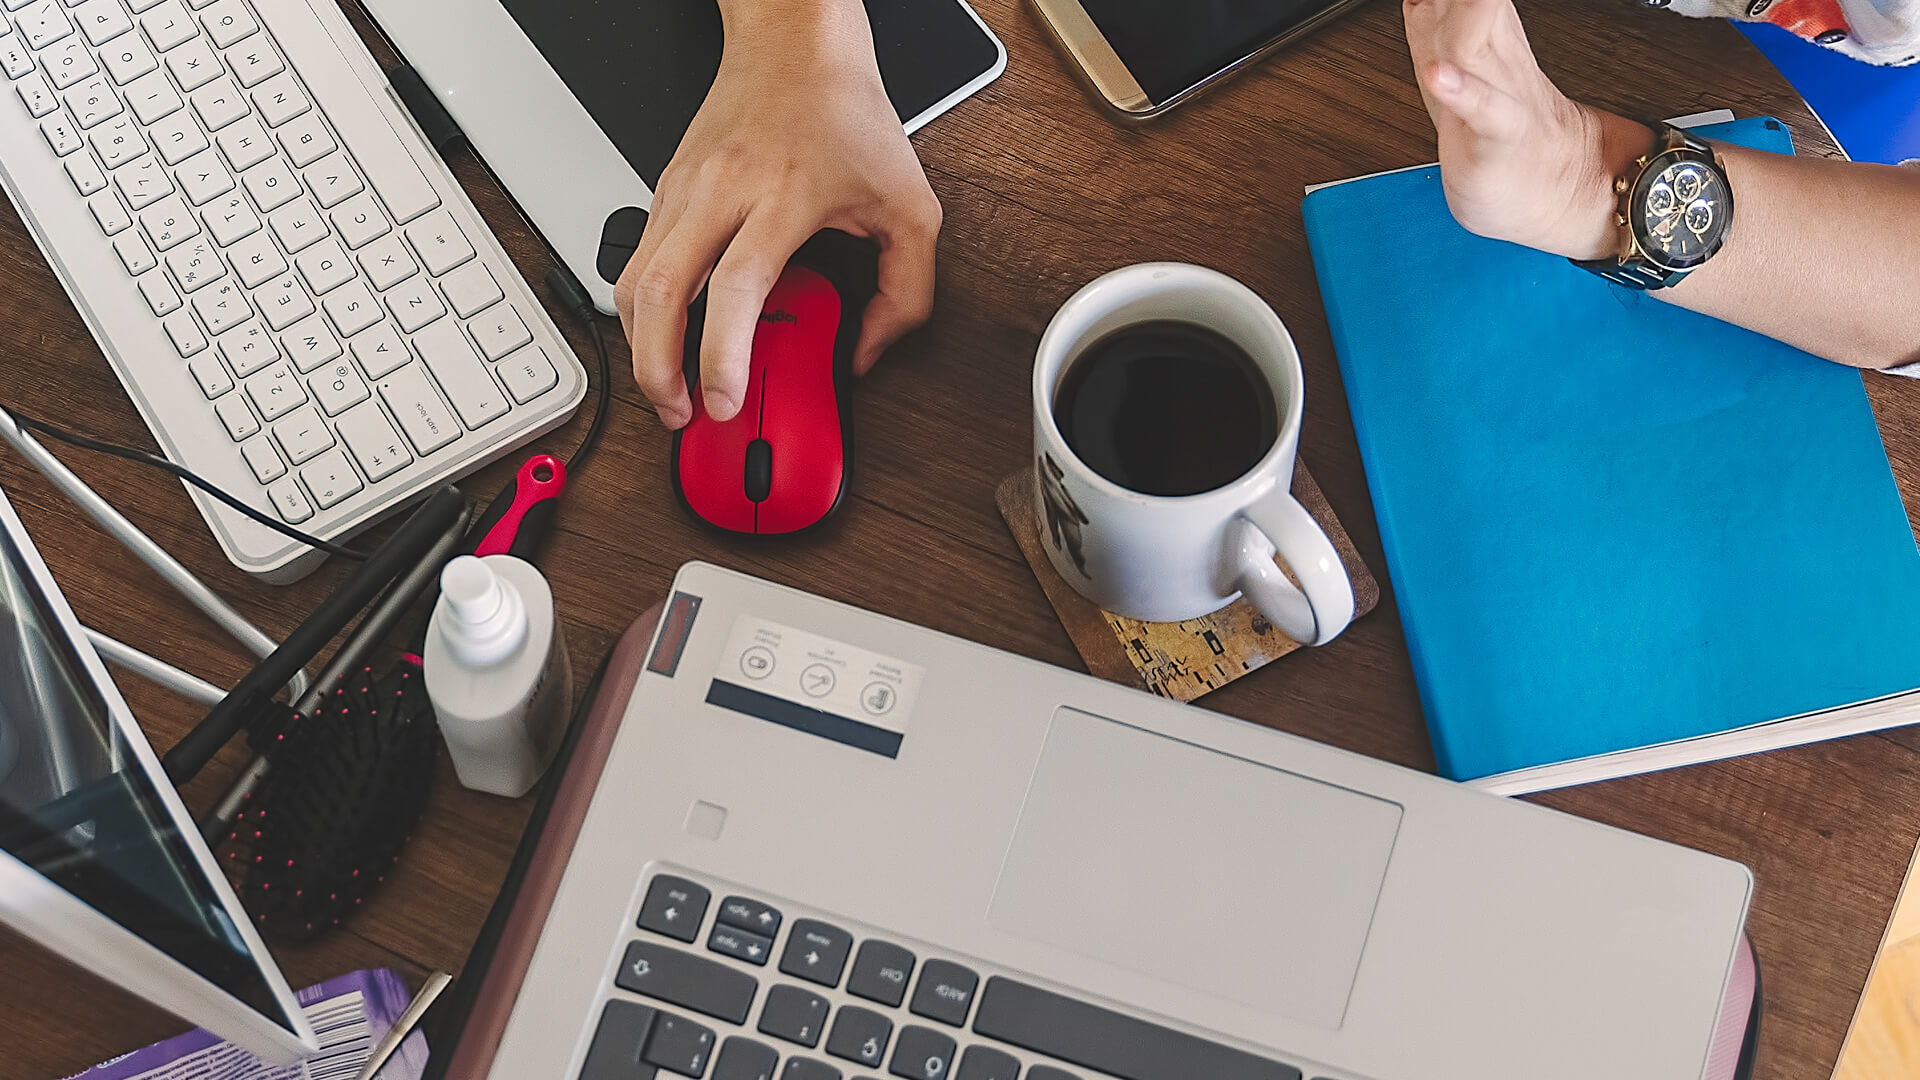 holding mouse while working, work station desk multiple devices, cup of coffee | AdvancedMD